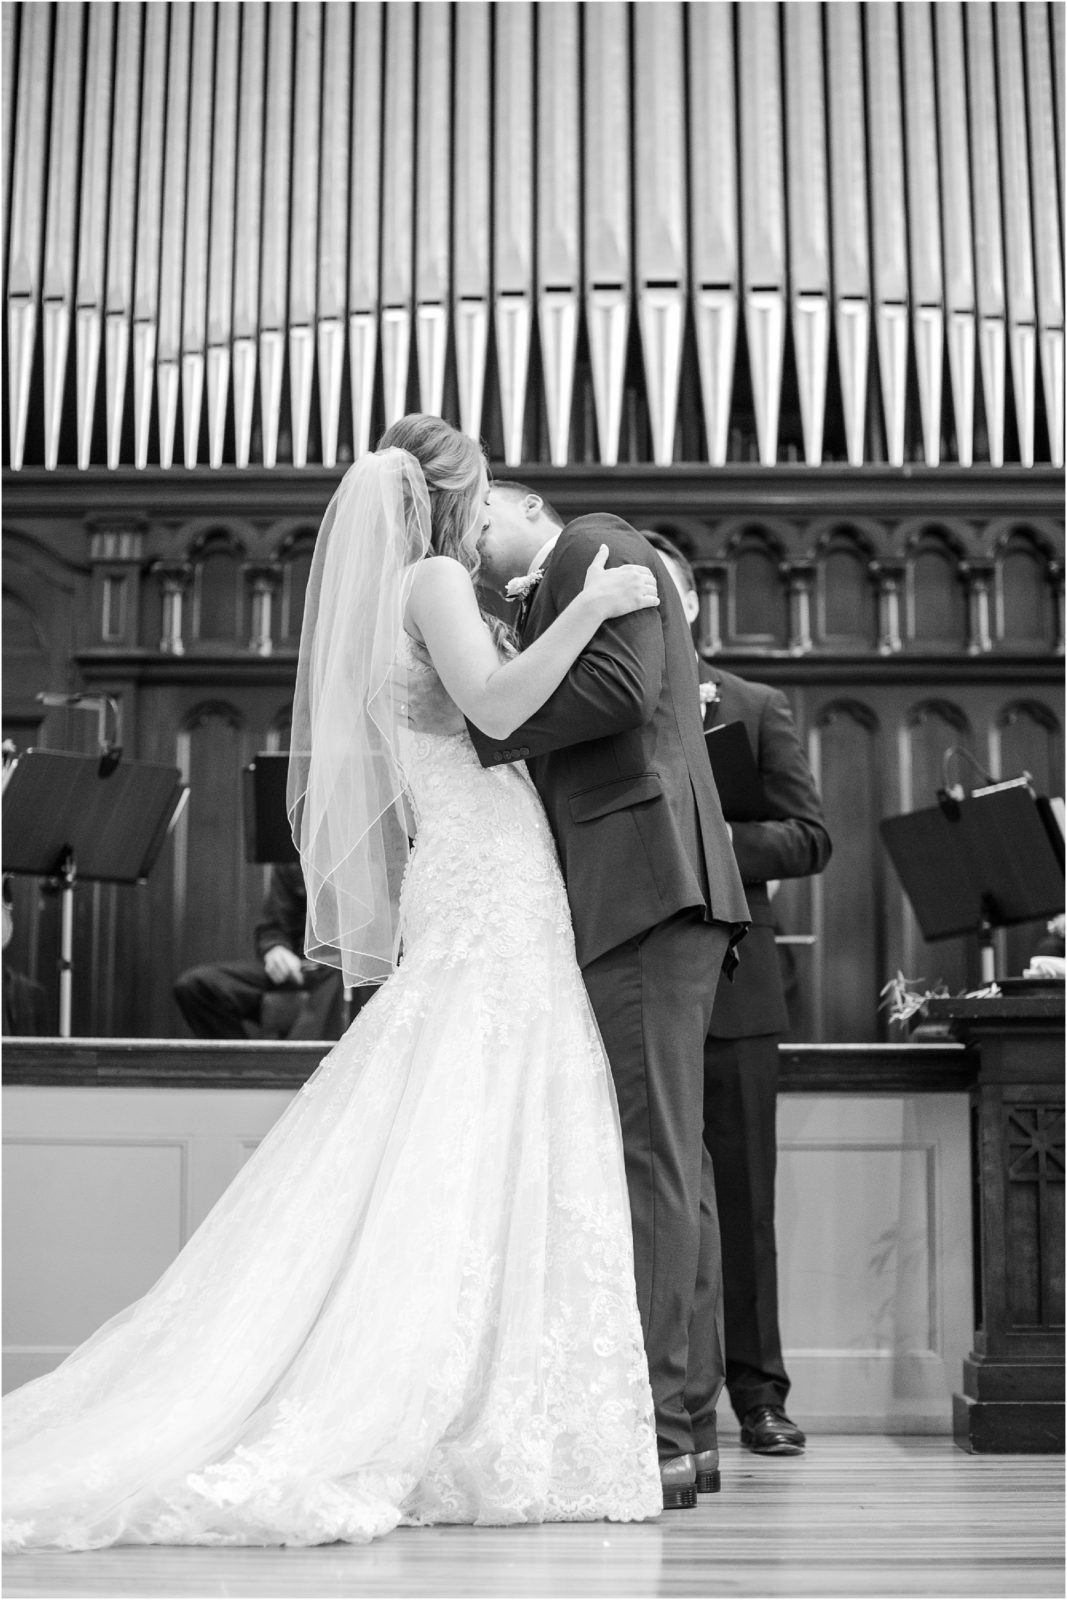 Couple kisses at wedding in church